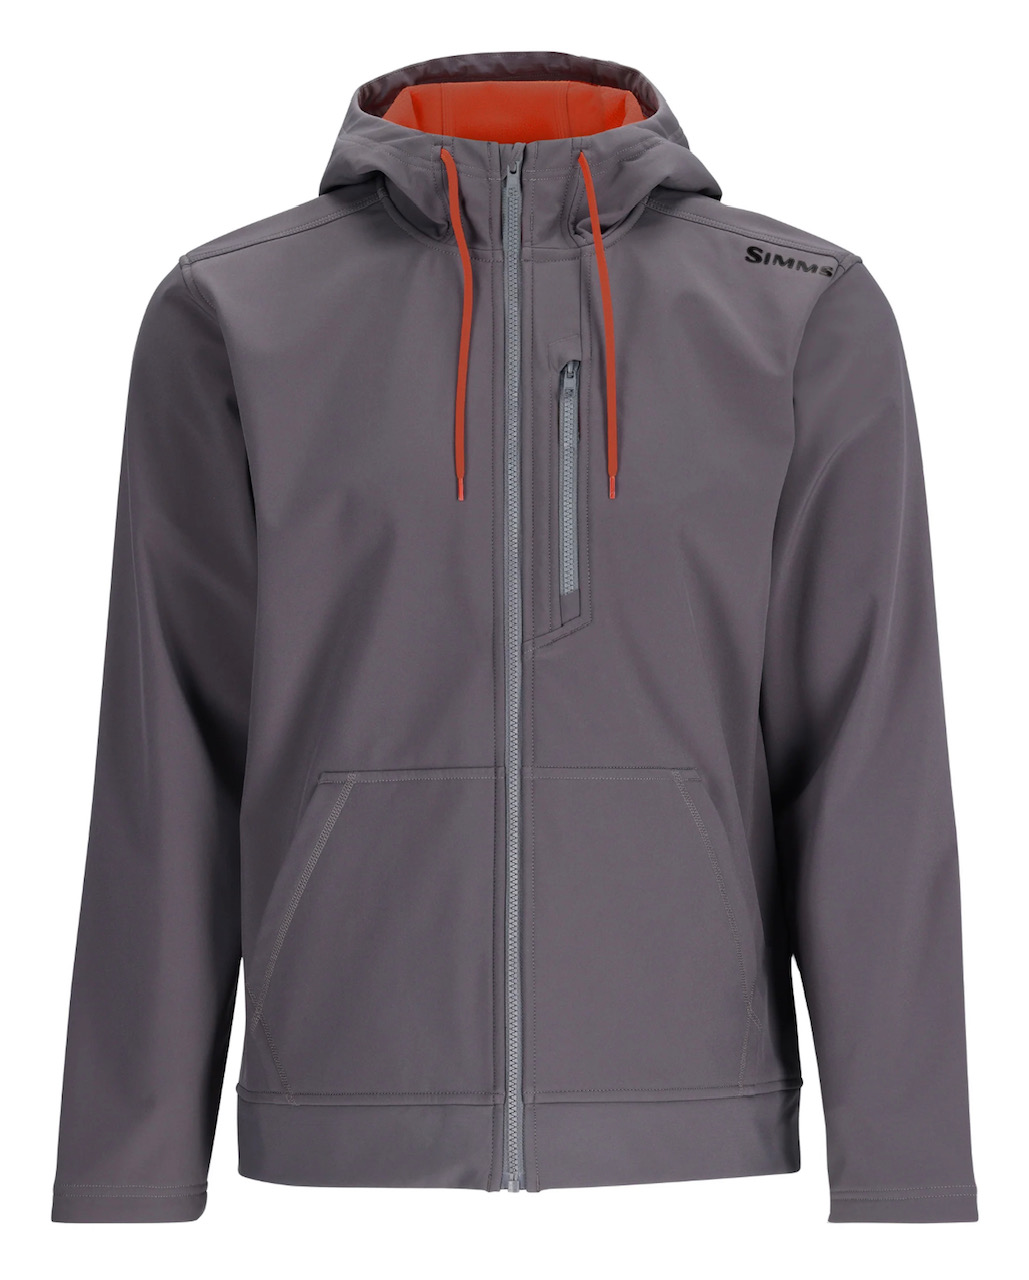 Simms M's Rogue Hoody - Hickory - Large